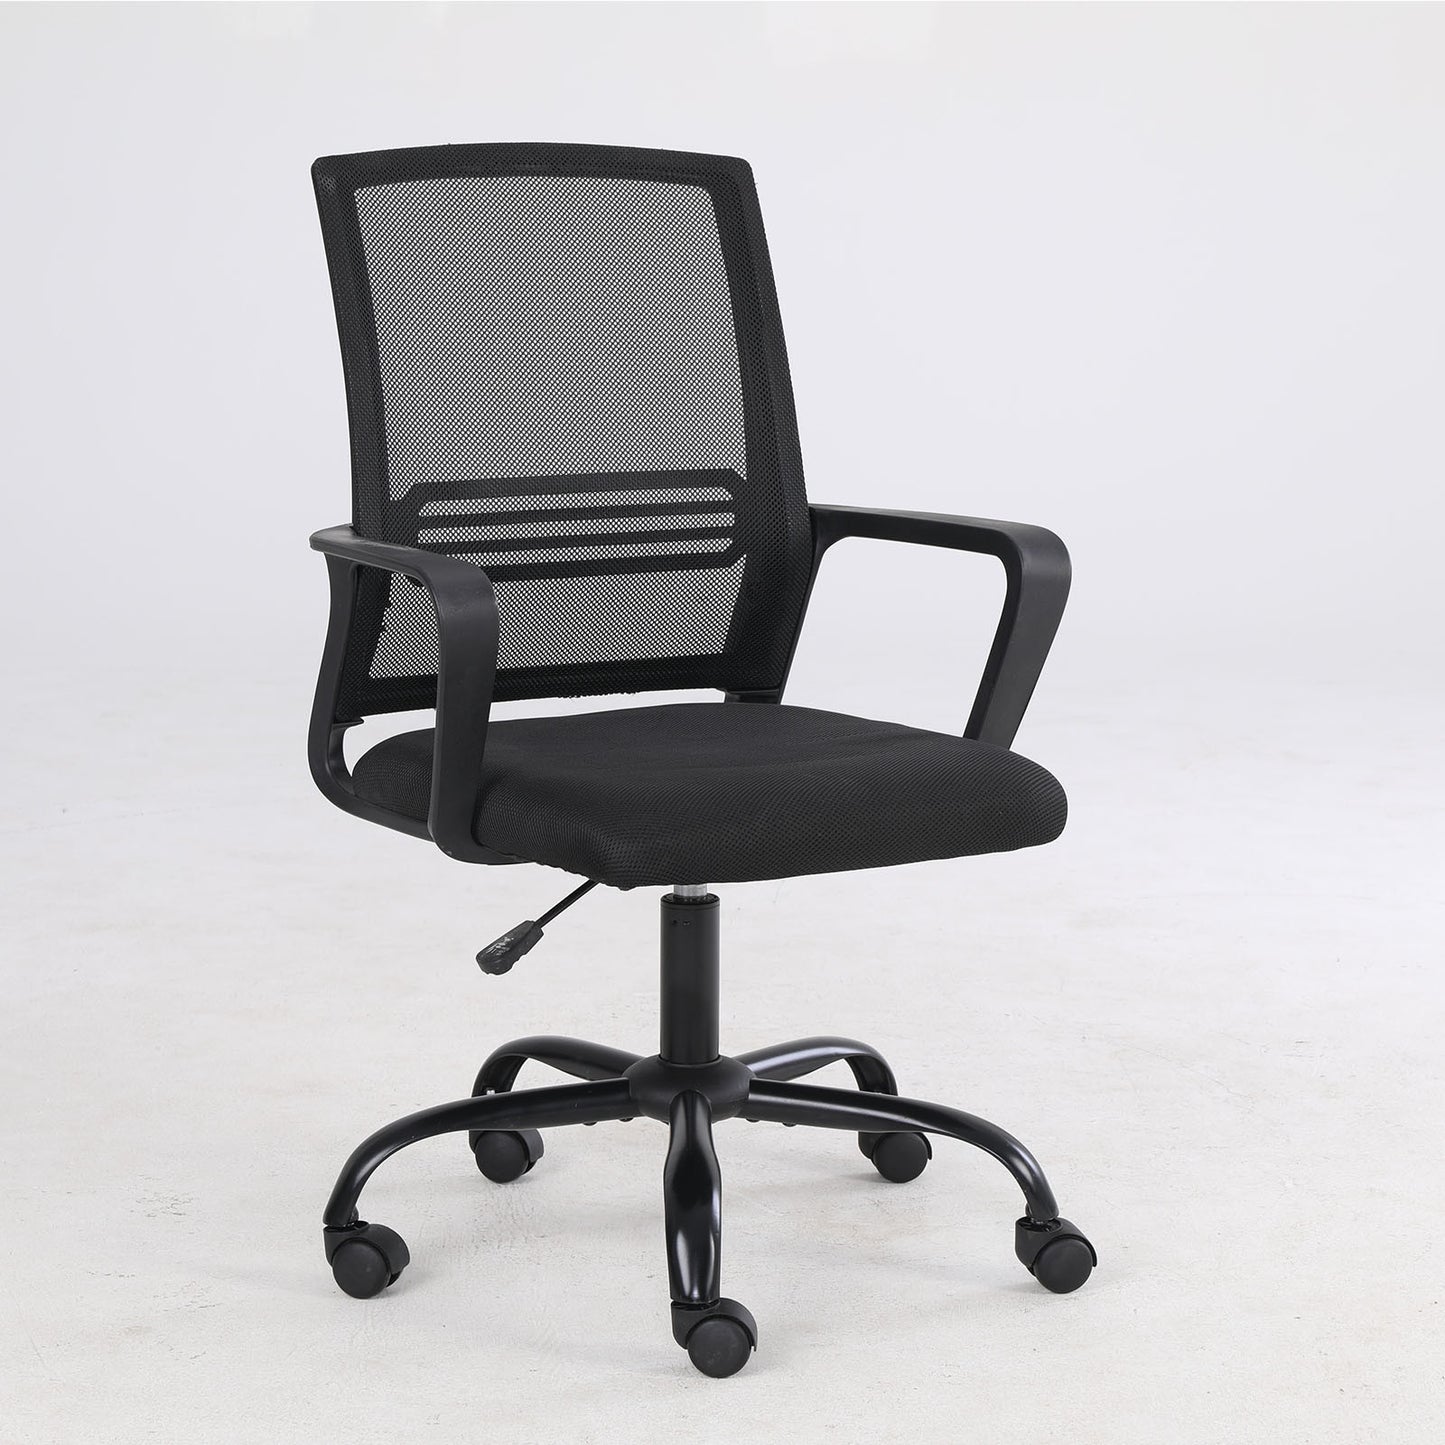 Office Chair Breathable Mesh, Computer Chair Lumbar Support, Modern Simple Adjustable Chair Height With Fixed Armrests, Suitable For Home Or Office (Black)